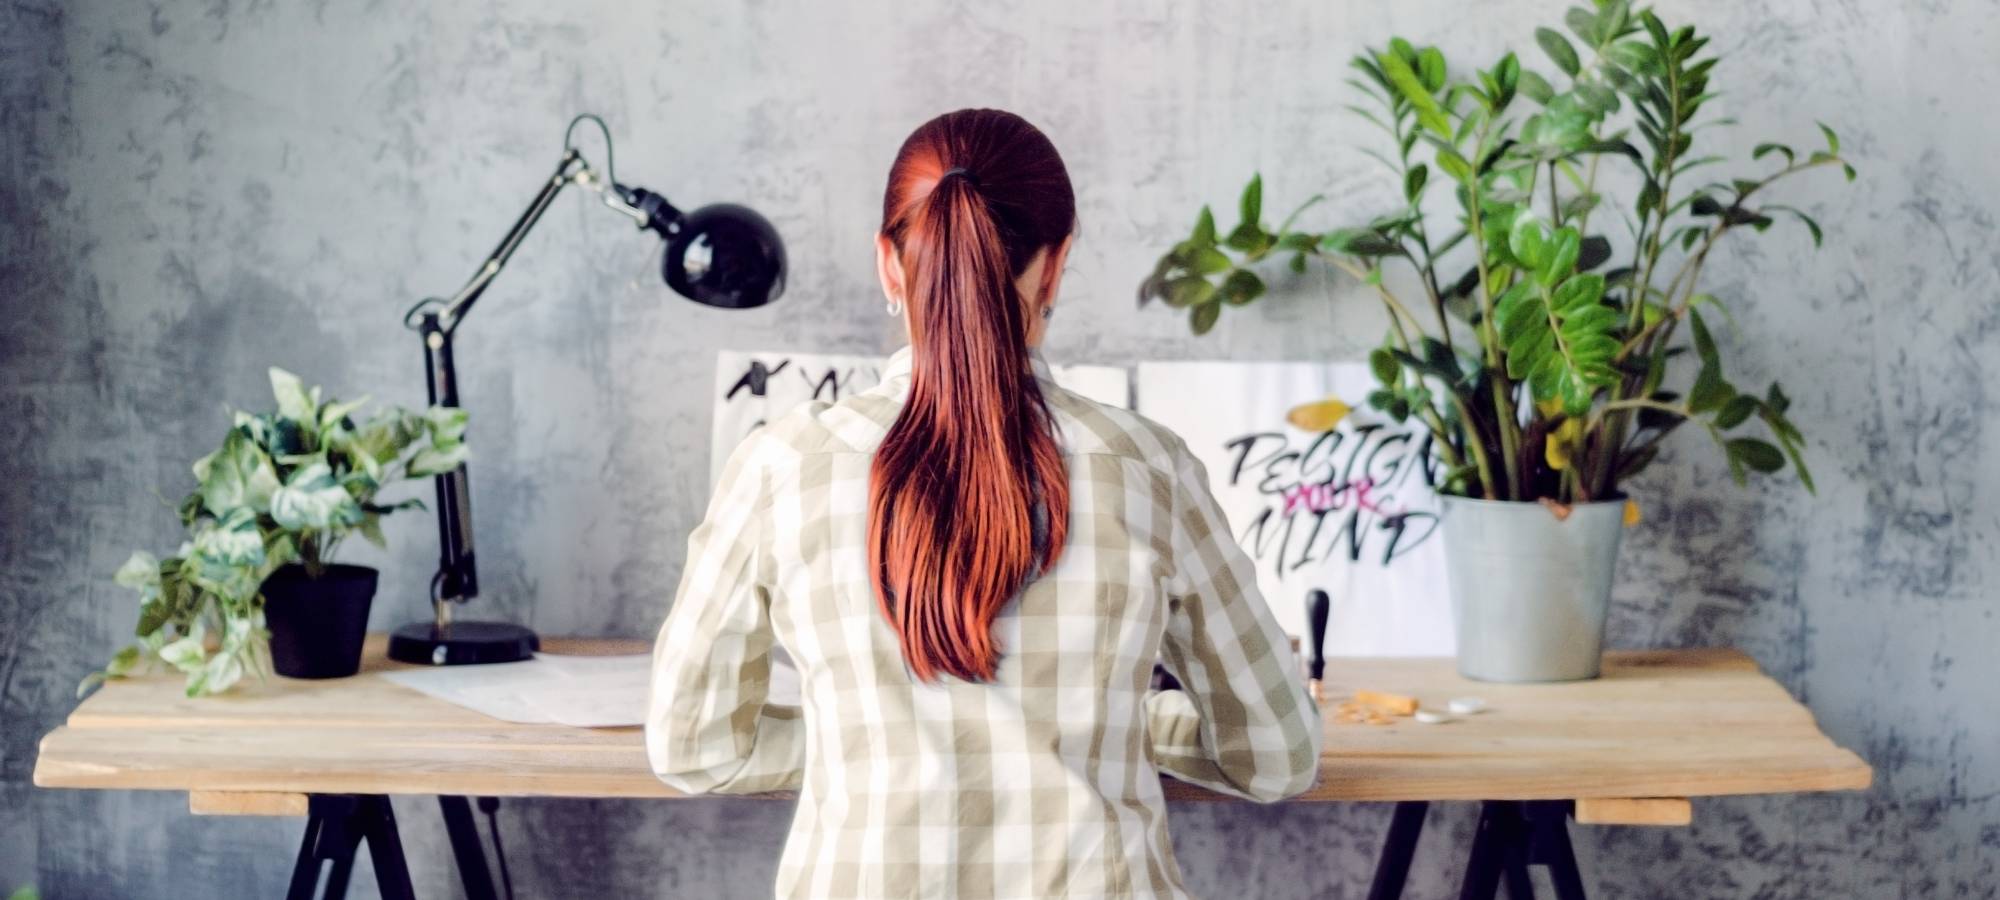 Woman with red hair drawing calligraphy with a desk lamp